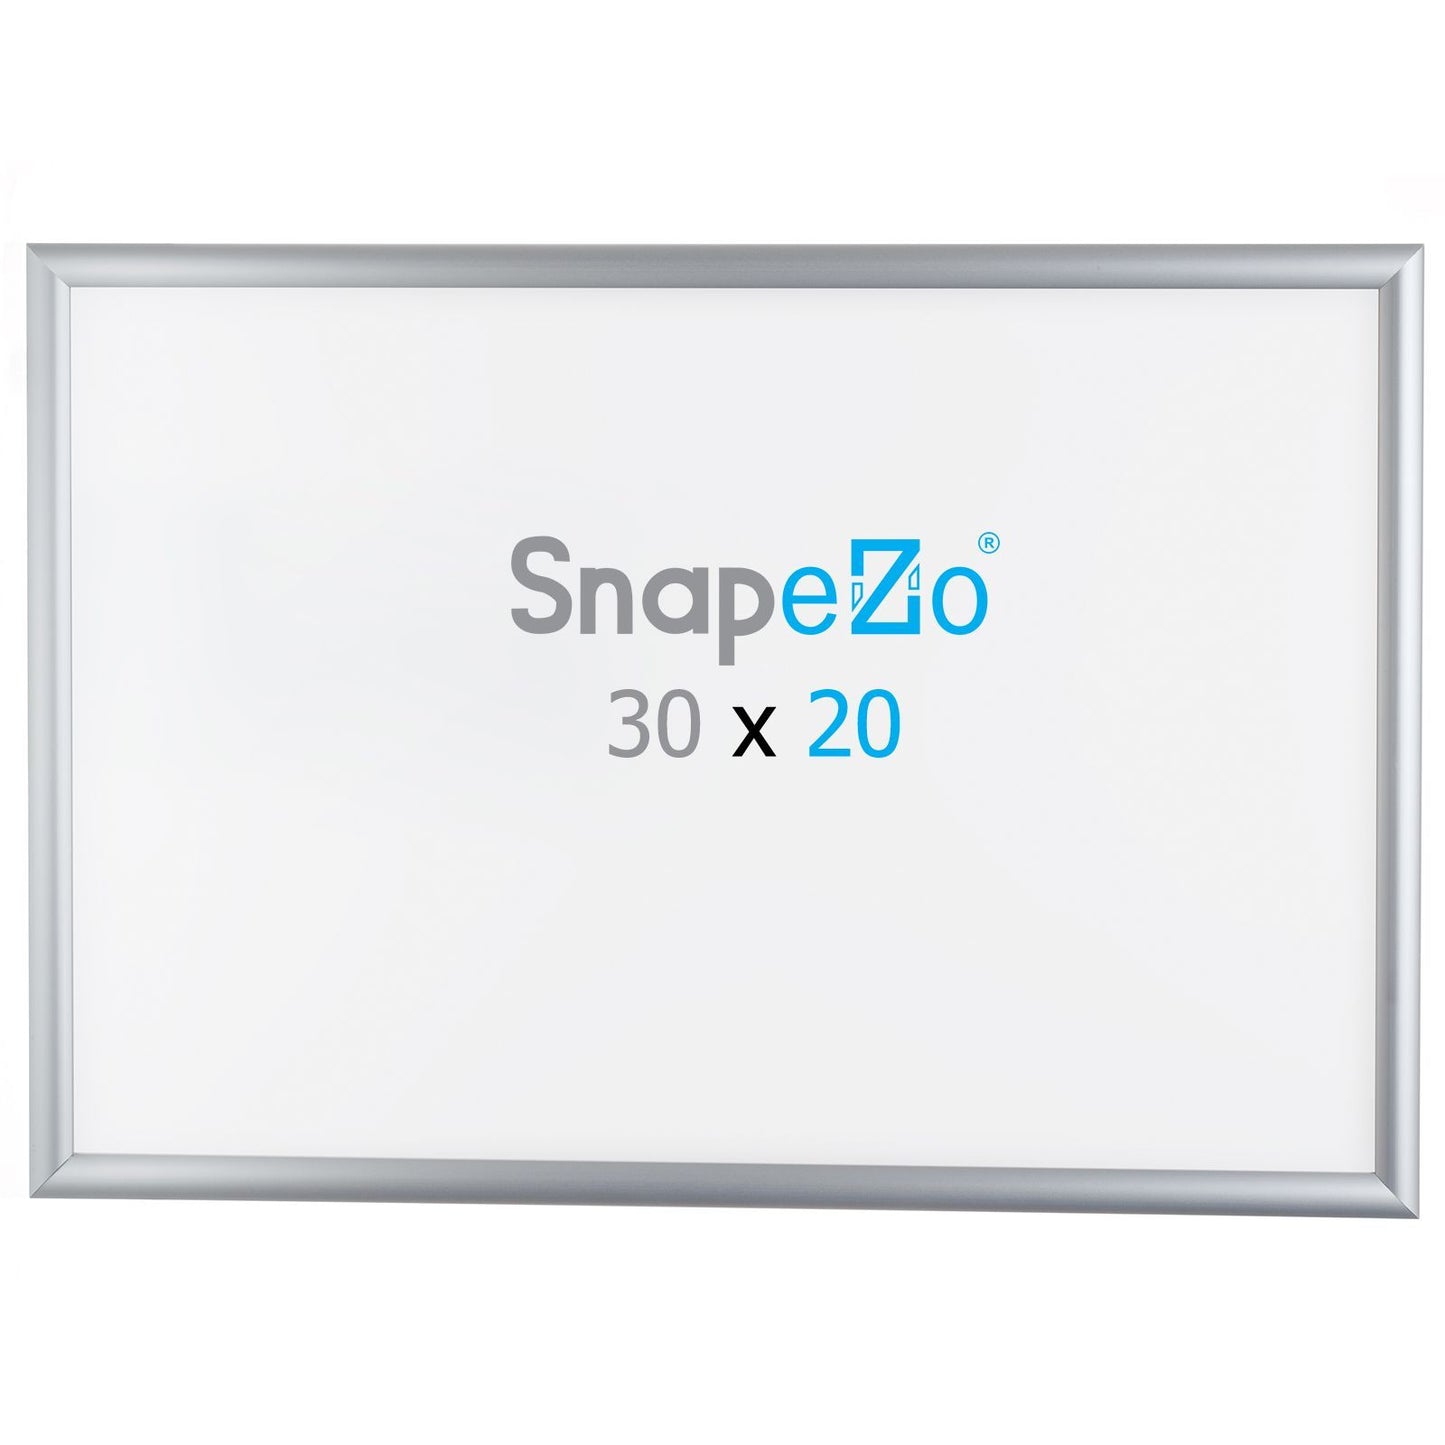 Load image into Gallery viewer, Brushed silver SnapeZo® snap frame poster size 20X30 - 1 inch profile
